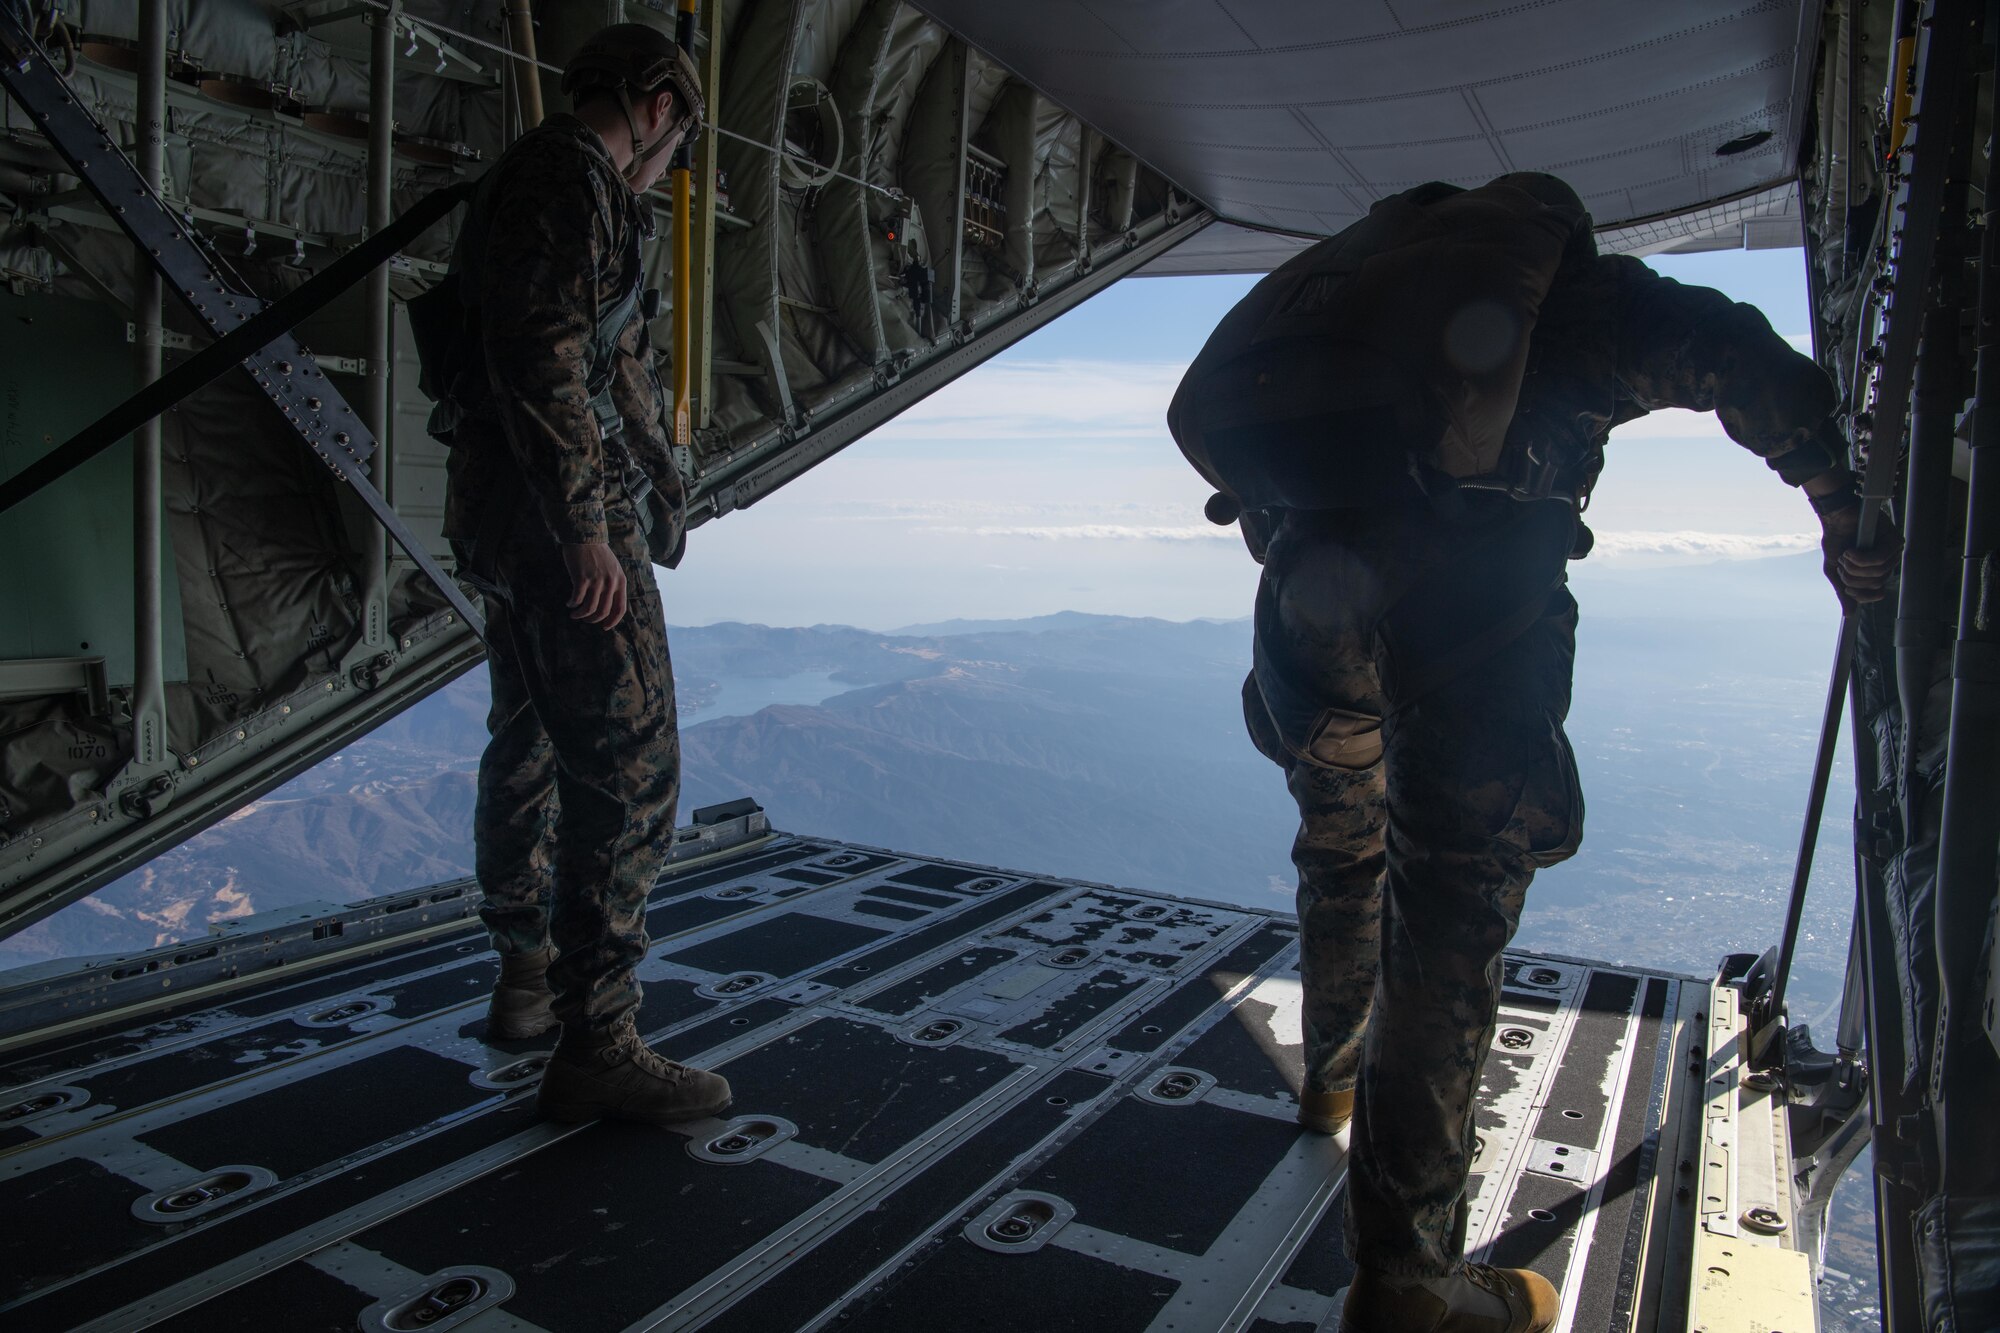 Marines assigned to the 3rd Reconnaissance Battalion, 3rd Marine Division, monitor jump progress during a high altitude, low opening (HALO) parachute jumps at Yokota Air Base, Japan, Dec. 17, 2021